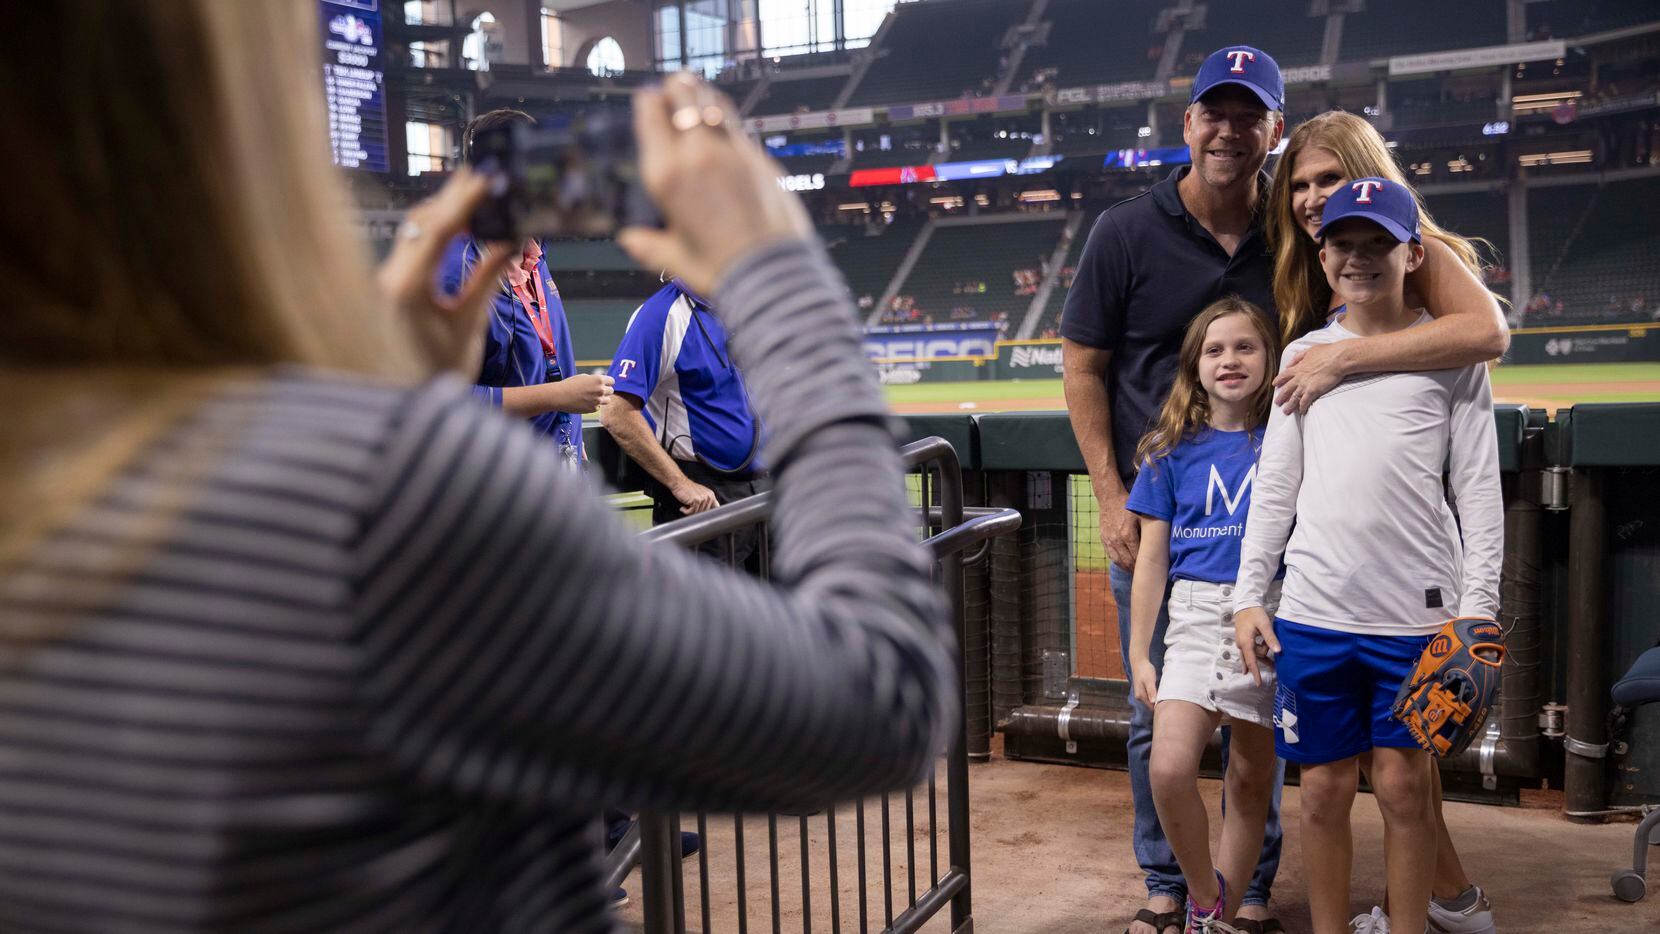 Owners Eddie Burns and Tiffany Burns of Monument Realty pose with their children McKenzie and Austin before Tiffany throws the first pitch at the Rangers Game on Aug. 3 at Globe Life Field.